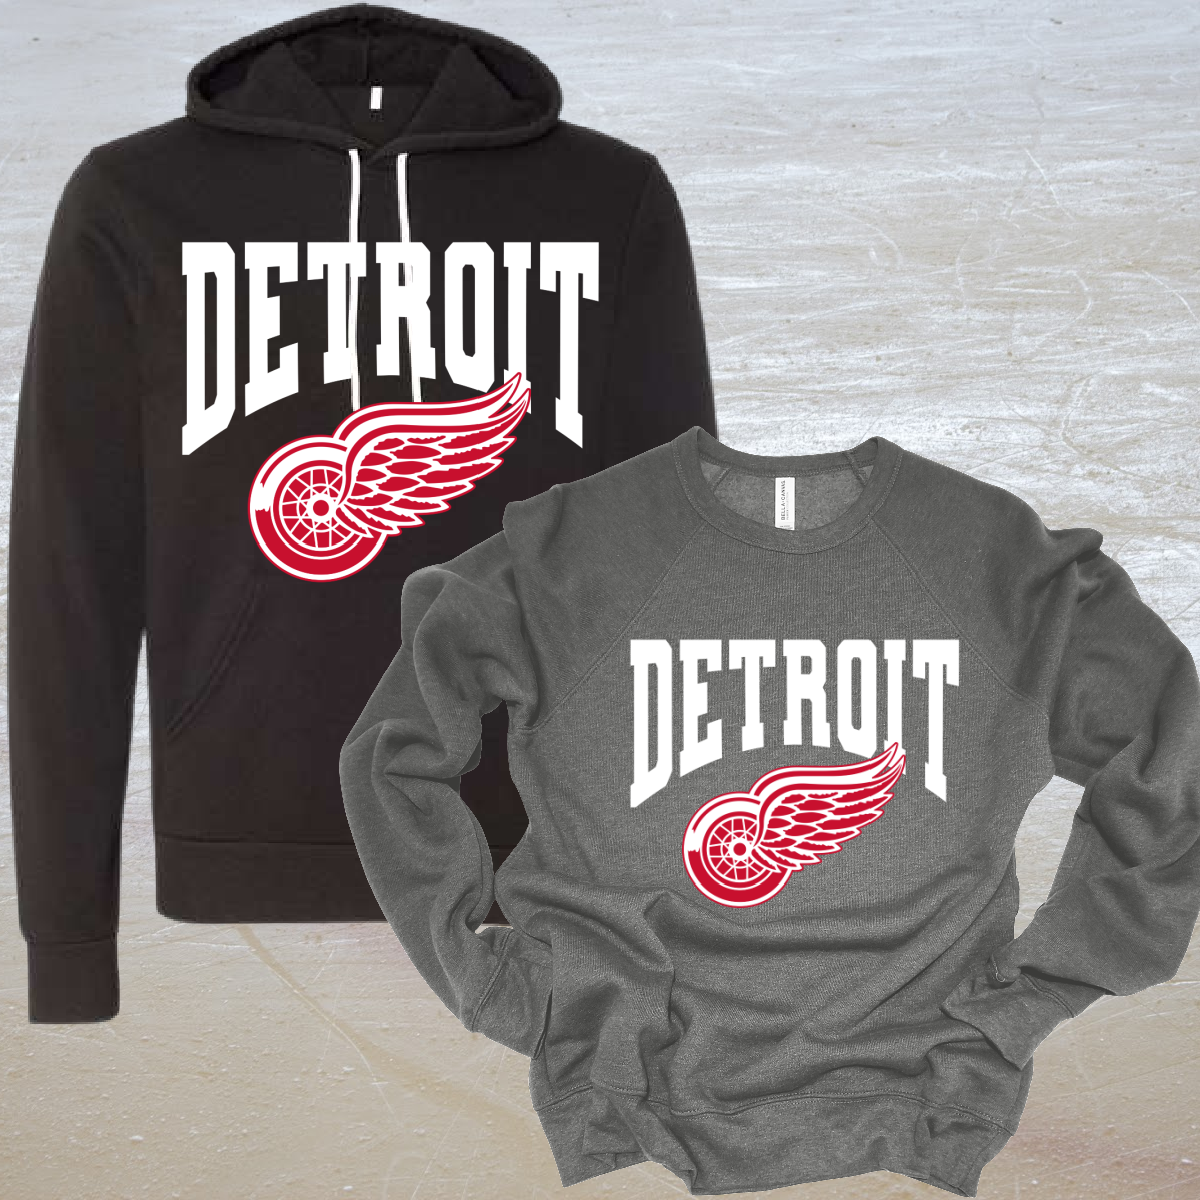 Detroit with Logo Premium Crewneck or Hoodie (Adult) - PREORDER - WILL SHIP BY 3/11